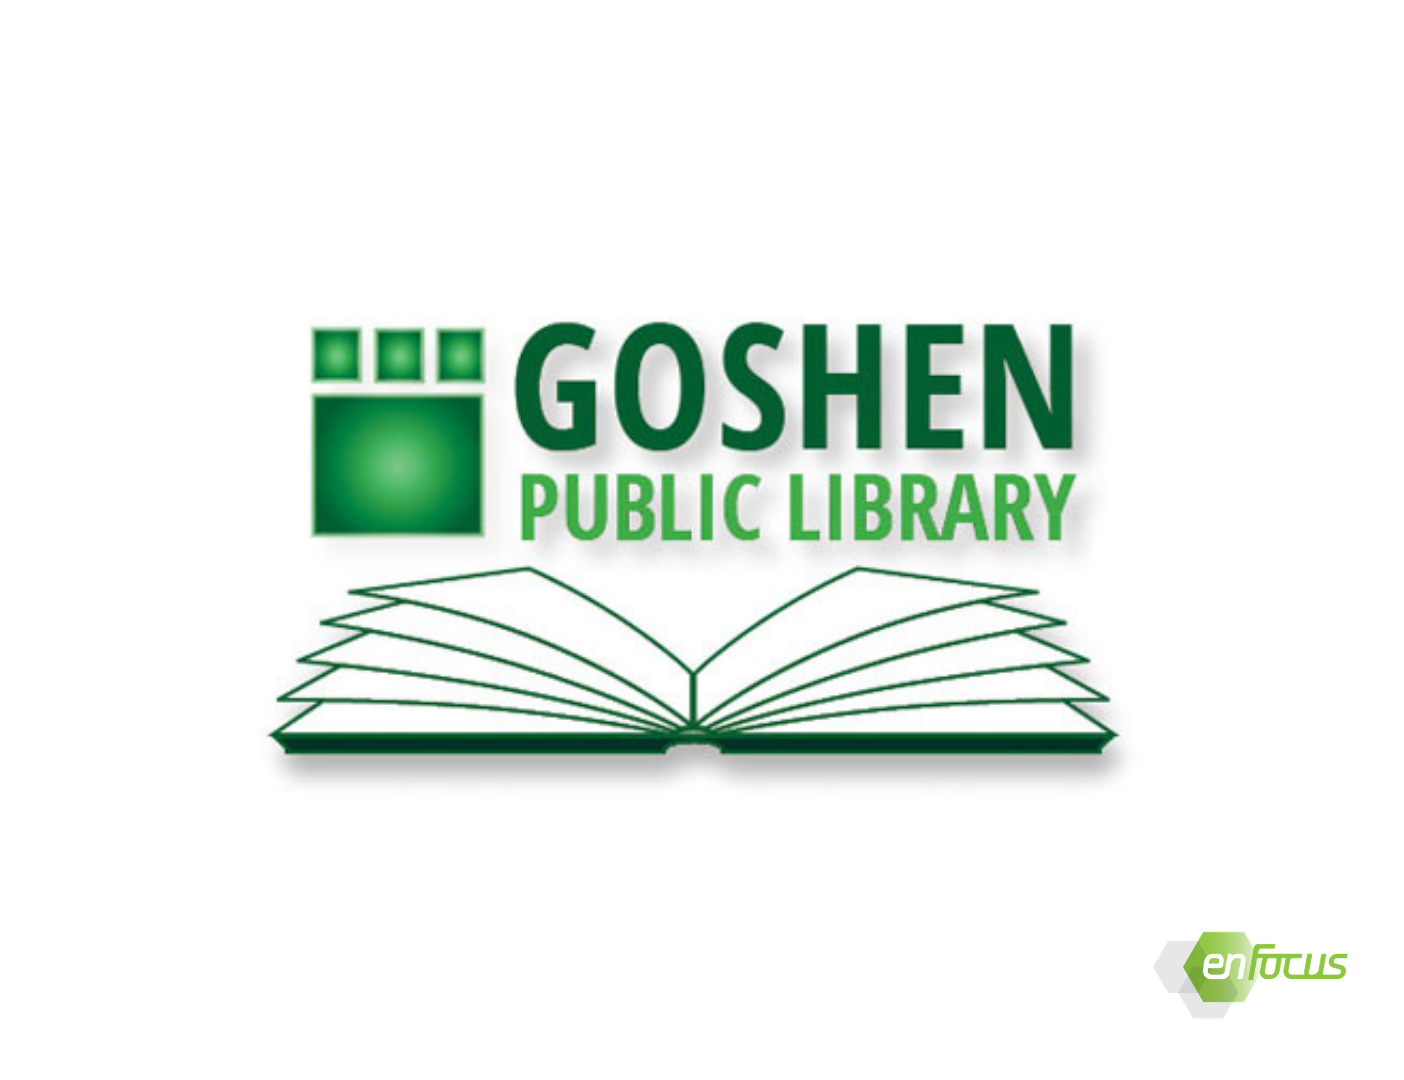 Goshen Public Library Uses enFocus Community Engagement Model & Data Analysis to Develop Five-Year Plan